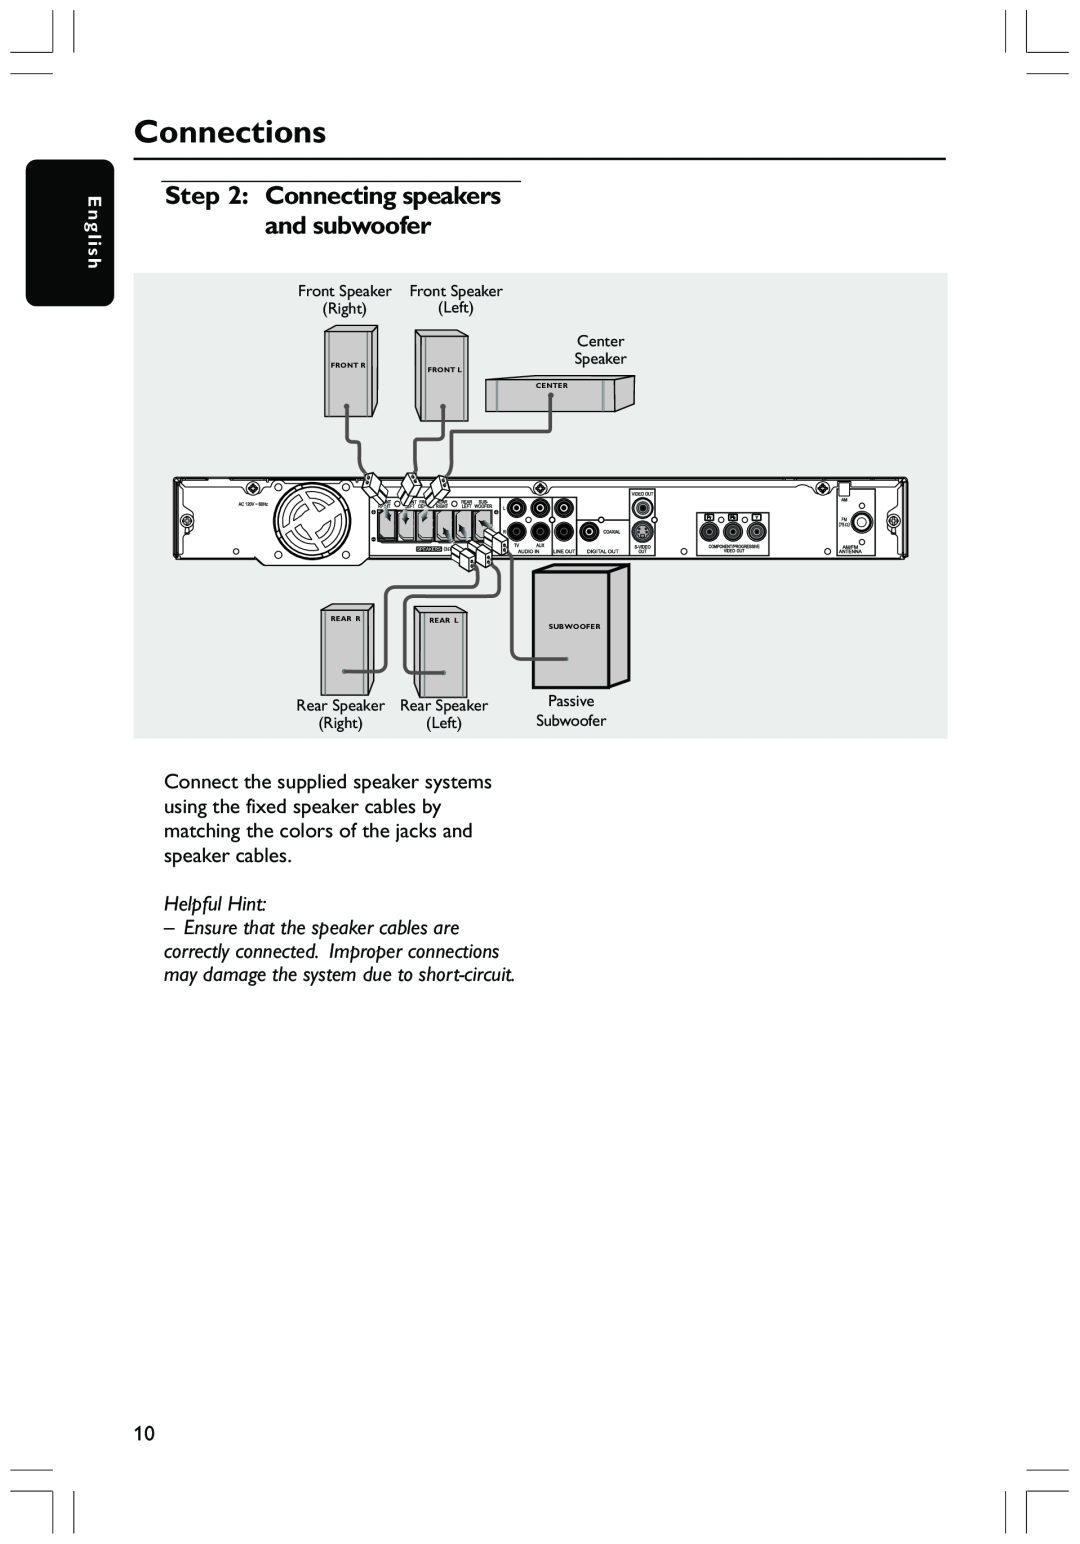 Philips HTS3410D user manual Connecting speakers and subwoofer, Connections, Helpful Hint, E n g l i s h 